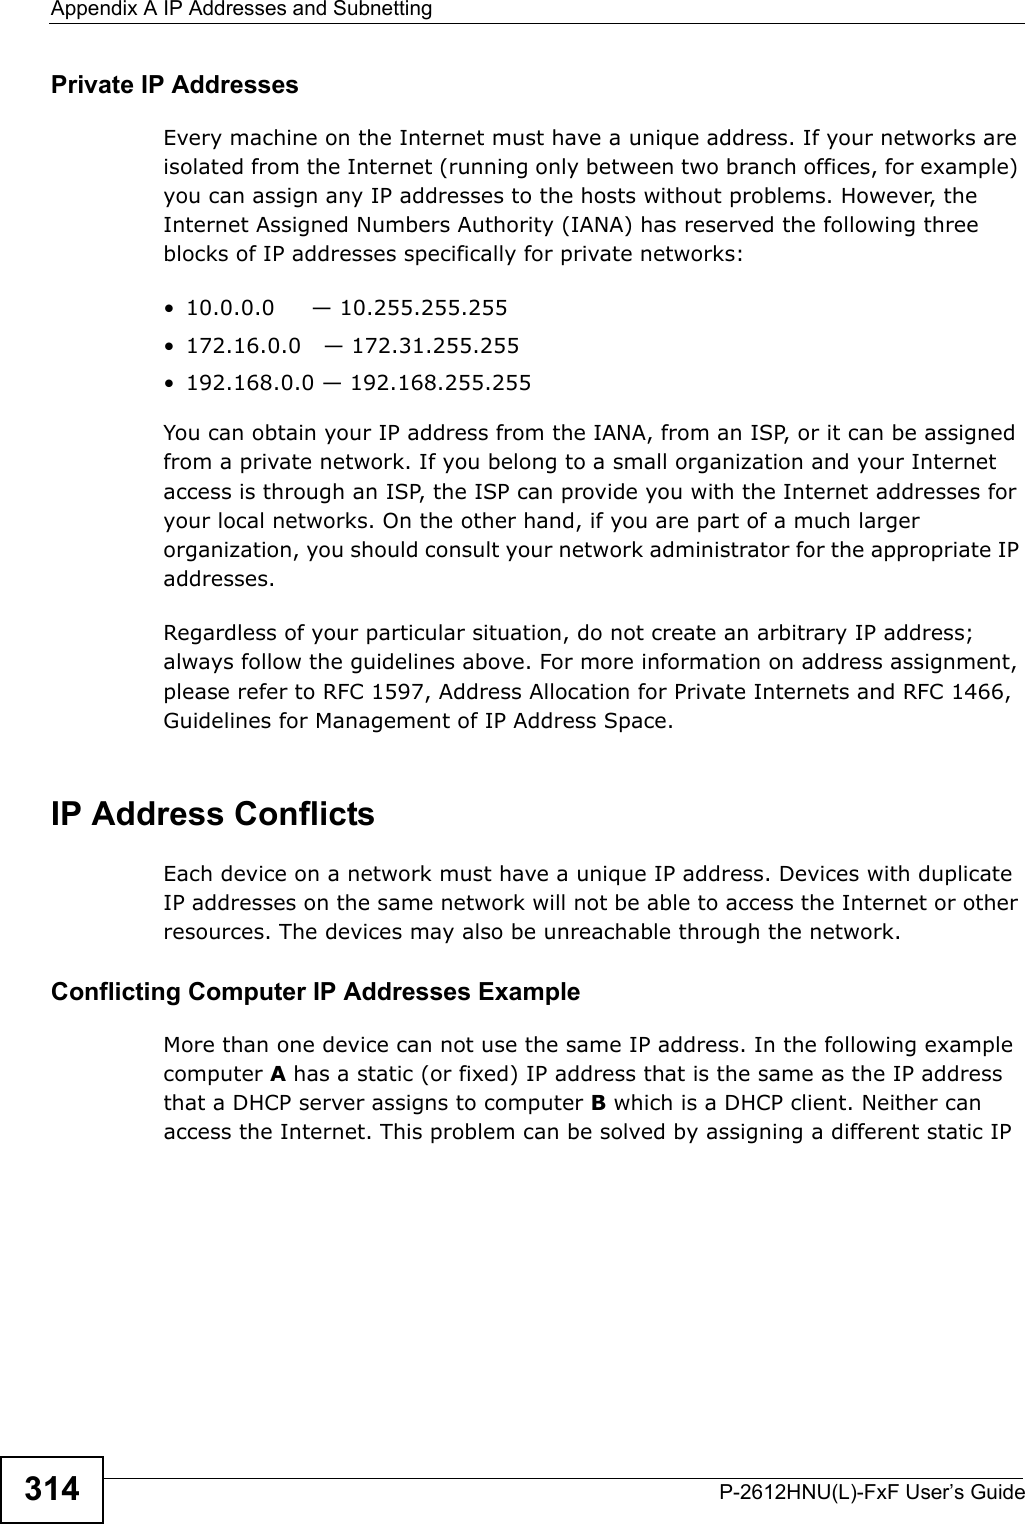 Appendix A IP Addresses and SubnettingP-2612HNU(L)-FxF User’s Guide314Private IP AddressesEvery machine on the Internet must have a unique address. If your networks are isolated from the Internet (running only between two branch offices, for example)you can assign any IP addresses to the hosts without problems. However, the Internet Assigned Numbers Authority (IANA) has reserved the following three blocks of IP addresses specifically for private networks:• 10.0.0.0     — 10.255.255.255• 172.16.0.0   — 172.31.255.255• 192.168.0.0 — 192.168.255.255You can obtain your IP address from the IANA, from an ISP, or it can be assigned from a private network. If you belong to a small organization and your Internet access is through an ISP, the ISP can provide you with the Internet addresses for your local networks. On the other hand, if you are part of a much larger organization, you should consult your network administrator for the appropriate IPaddresses.Regardless of your particular situation, do not create an arbitrary IP address;always follow the guidelines above. For more information on address assignment, please refer to RFC 1597, Address Allocation for Private Internets and RFC 1466,Guidelines for Management of IP Address Space.IP Address ConflictsEach device on a network must have a unique IP address. Devices with duplicate IP addresses on the same network will not be able to access the Internet or other resources. The devices may also be unreachable through the network. Conflicting Computer IP Addresses ExampleMore than one device can not use the same IP address. In the following example computer A has a static (or fixed) IP address that is the same as the IP address that a DHCP server assigns to computer B which is a DHCP client. Neither can access the Internet. This problem can be solved by assigning a different static IP 